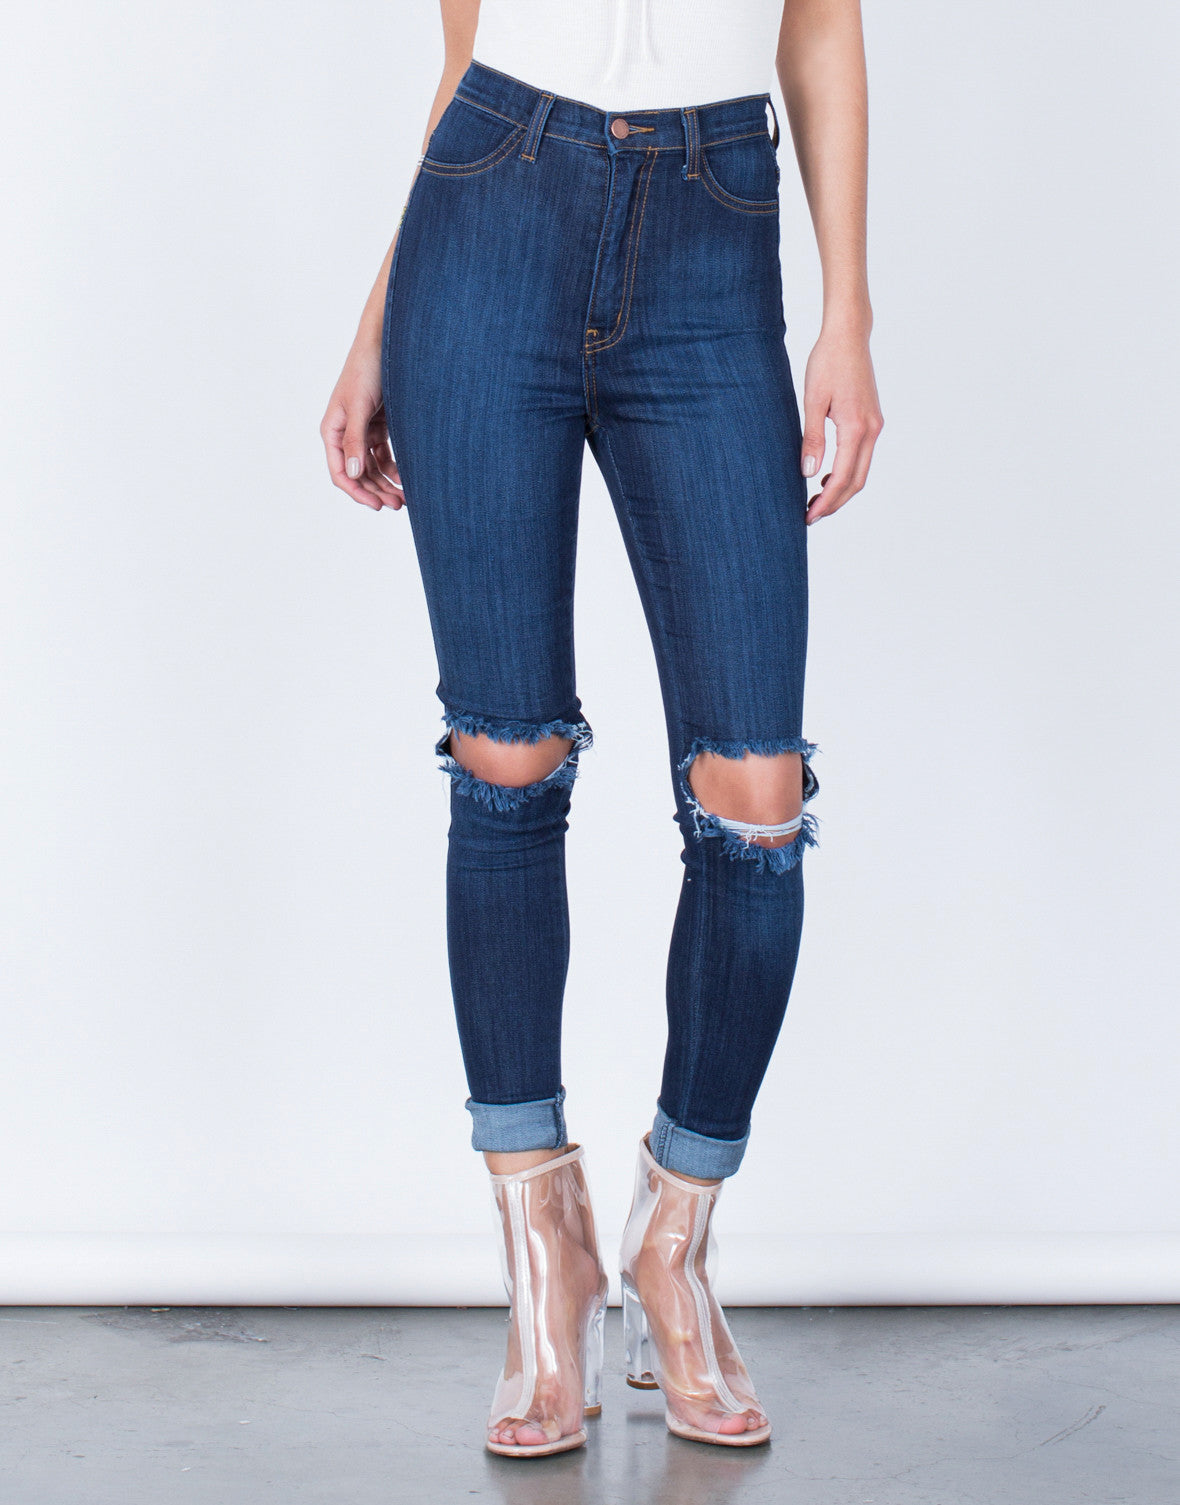 Knee Cut Blue Jeans For Sale Off 64